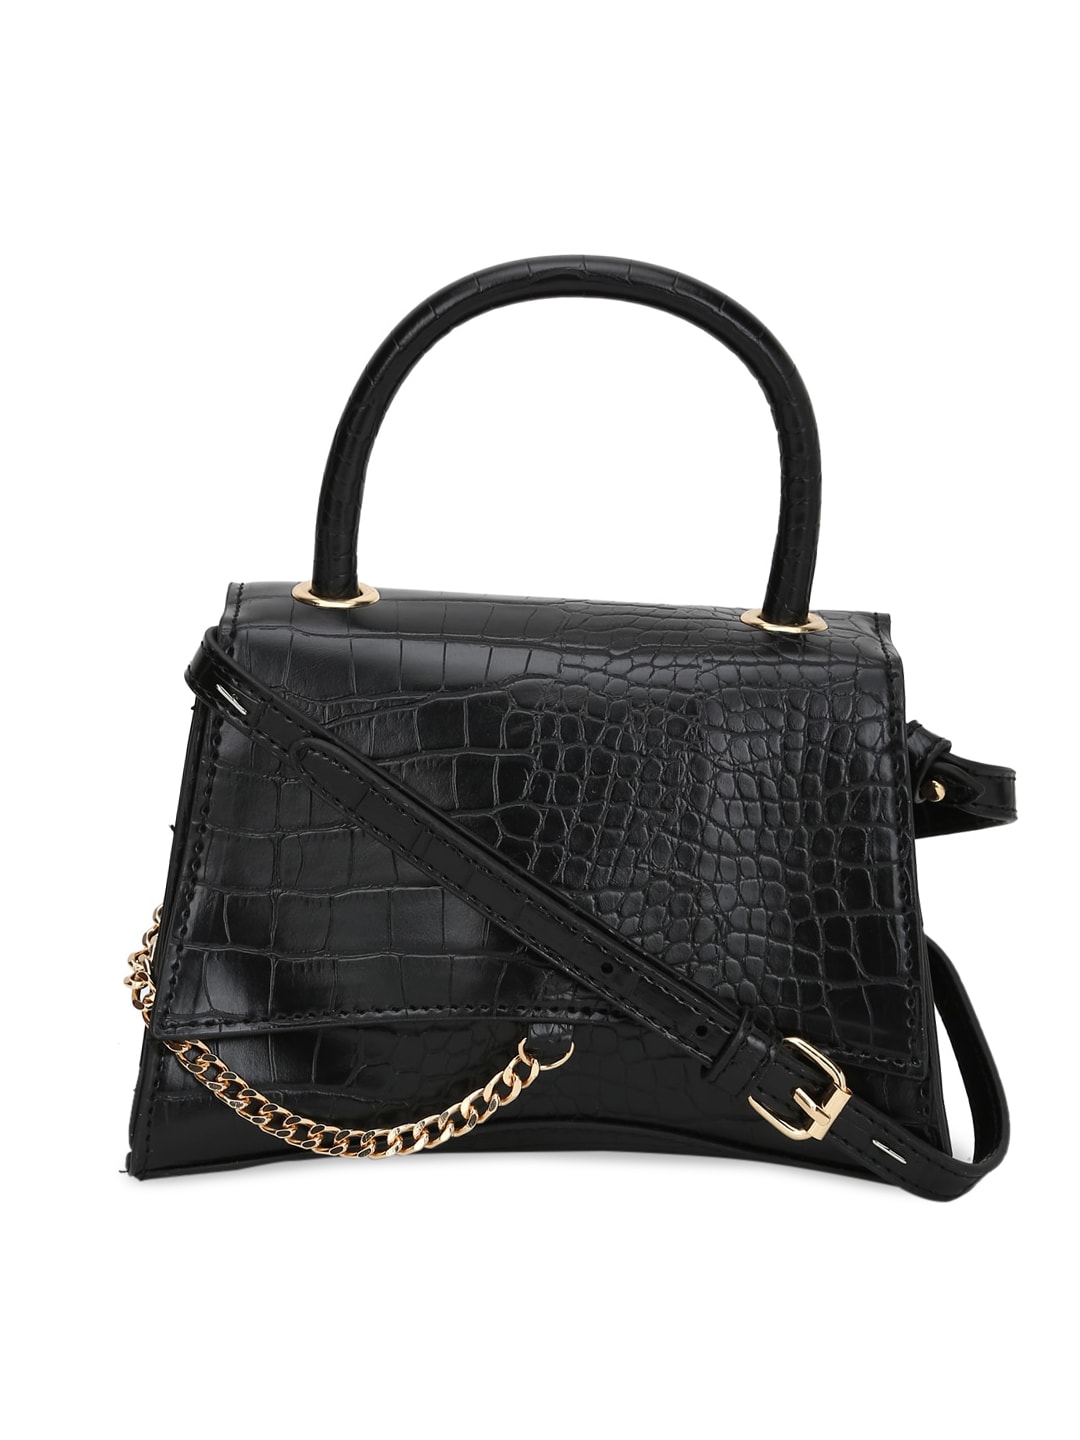 FOREVER 21 Black Textured Structured Satchel Bag Price in India